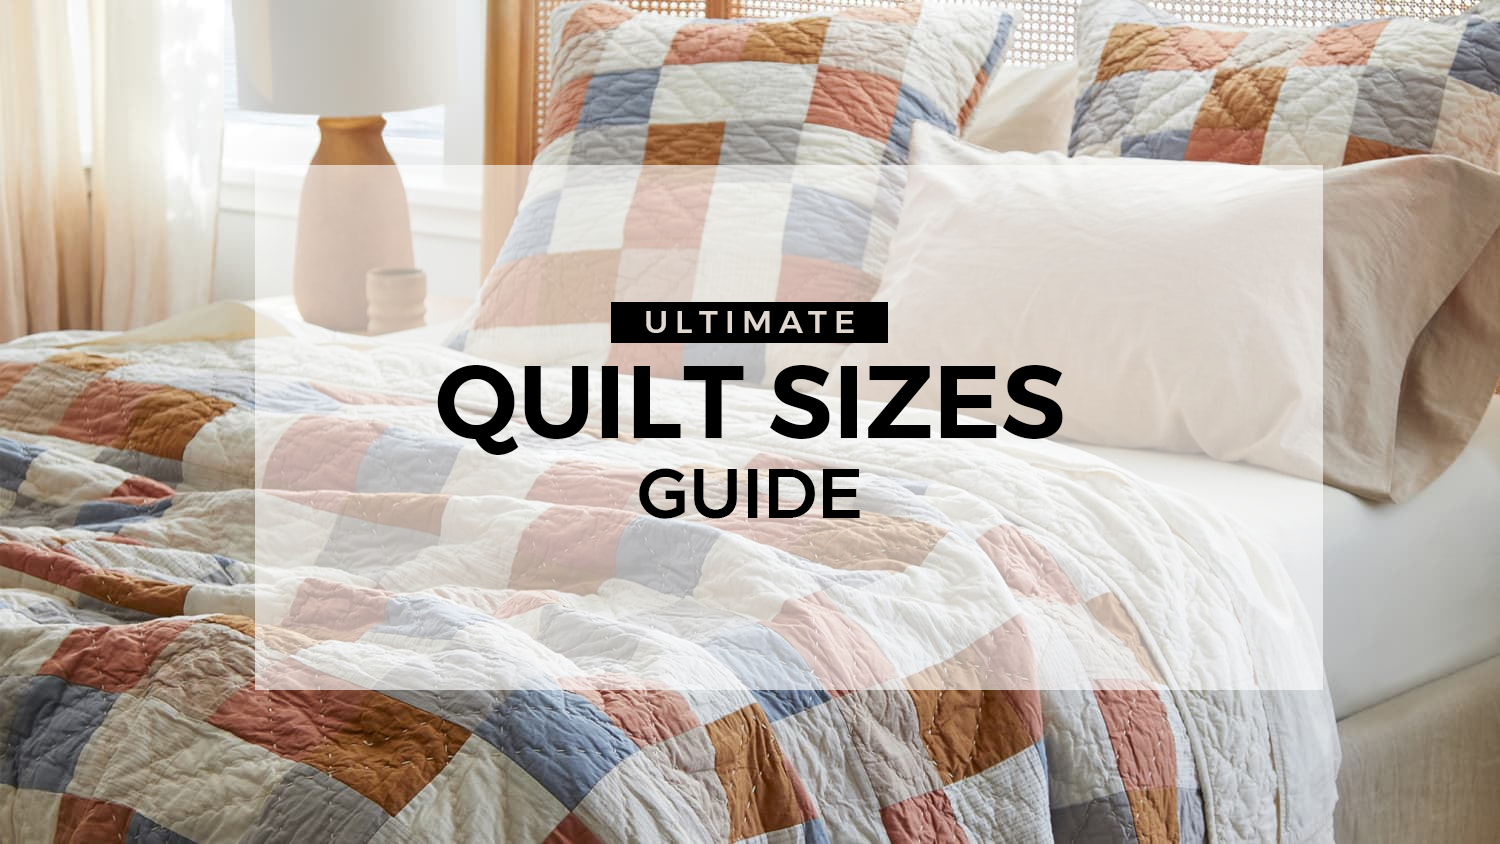 Baby Blanket sizes & Baby-Quilt Sizes Explained - SewGuide